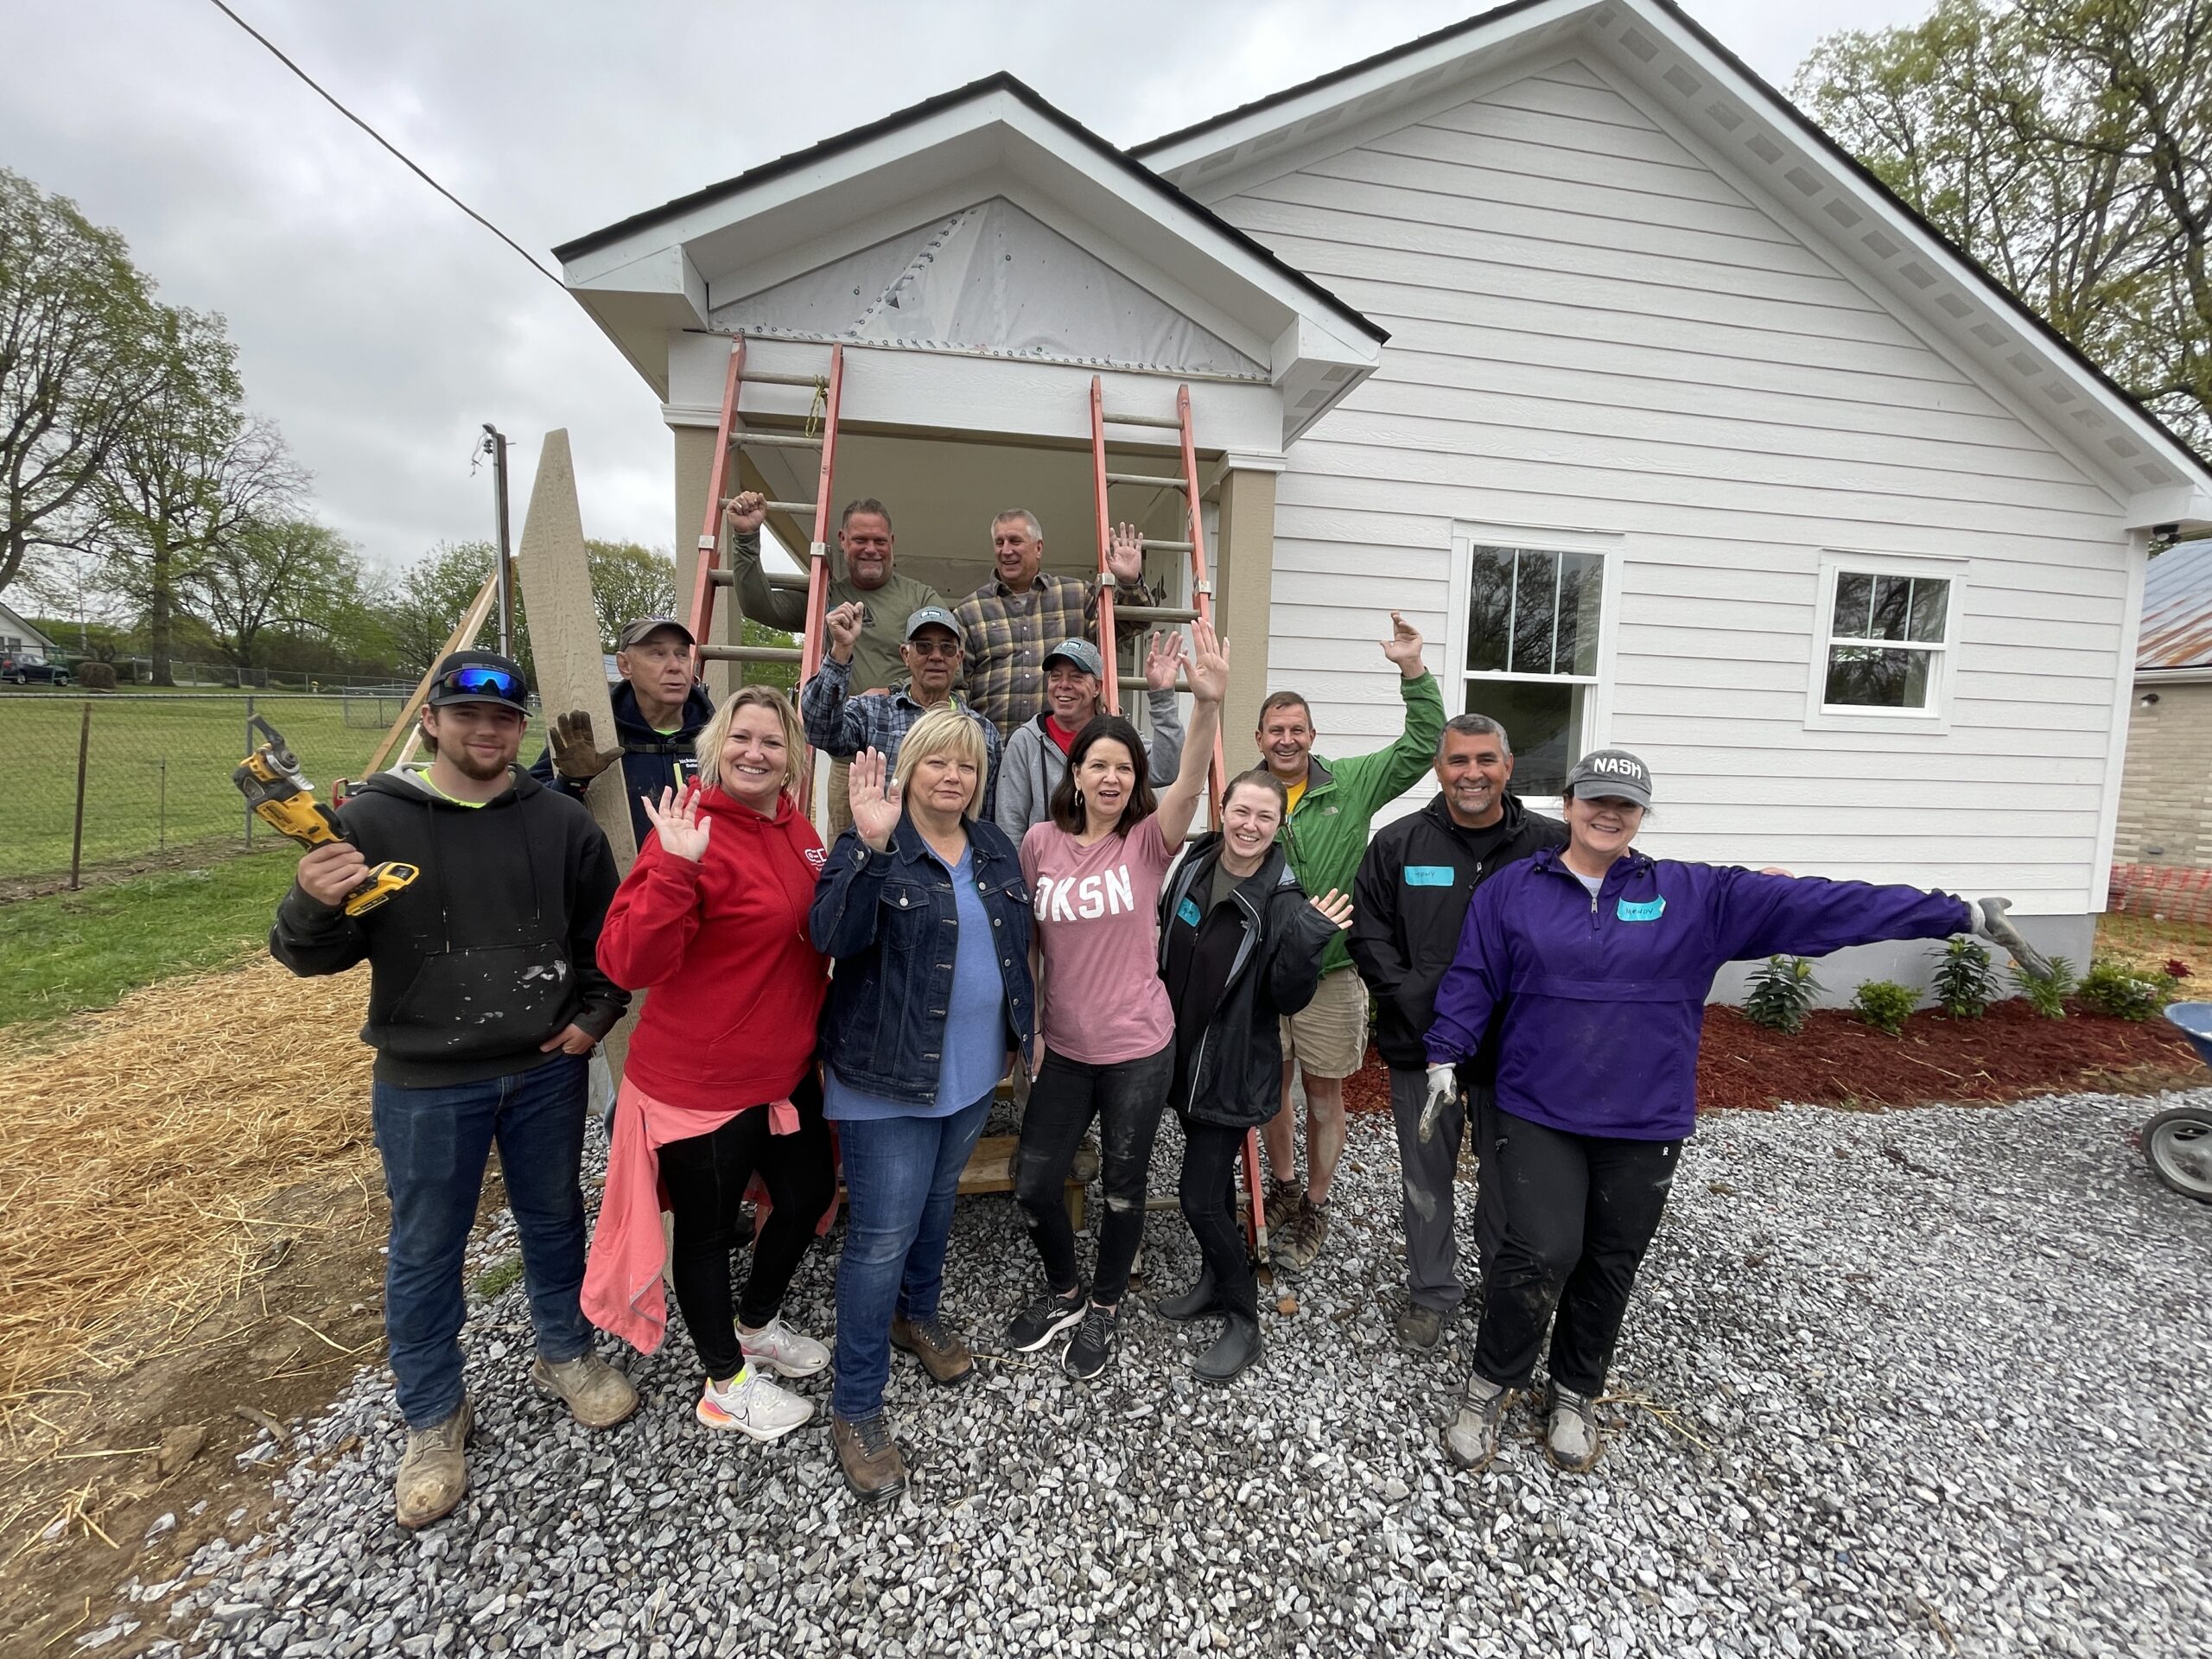 A Habitat for Humanity team with a completed house in Dickson, TN